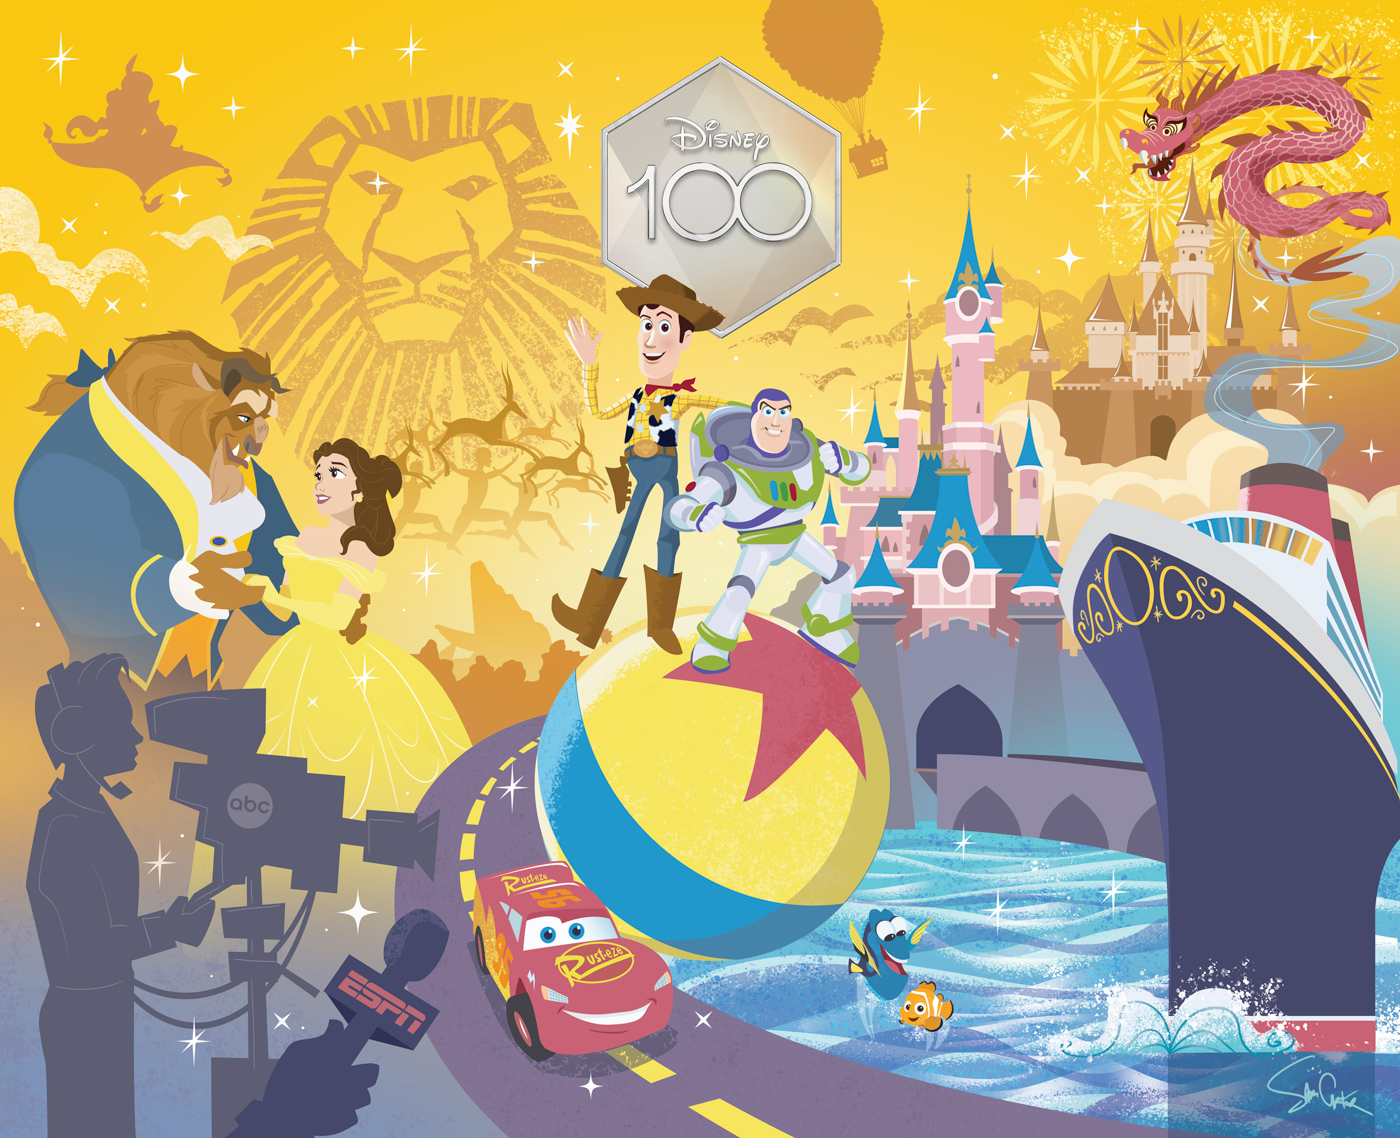 An illustration highlighting Disney’s major accomplishments in the 1990s and early 2000s. Featured art includes Beauty and the Beast, Buzz and Woody standing on the Pixar ball, Disney Cruise Line, Hong Kong Disneyland, Nemo and Dory, The Lion King on Broadway logo, the silhouettes of an ABC camera operator, an ESPN microphone and flag, Aladdin and Jasmine, and the house from Pixar’s Up. The illustrations are set against a golden yellow background filled with clouds and sparkles. In the top center of the art is an iridescent, diamond-like logo for Disney100.